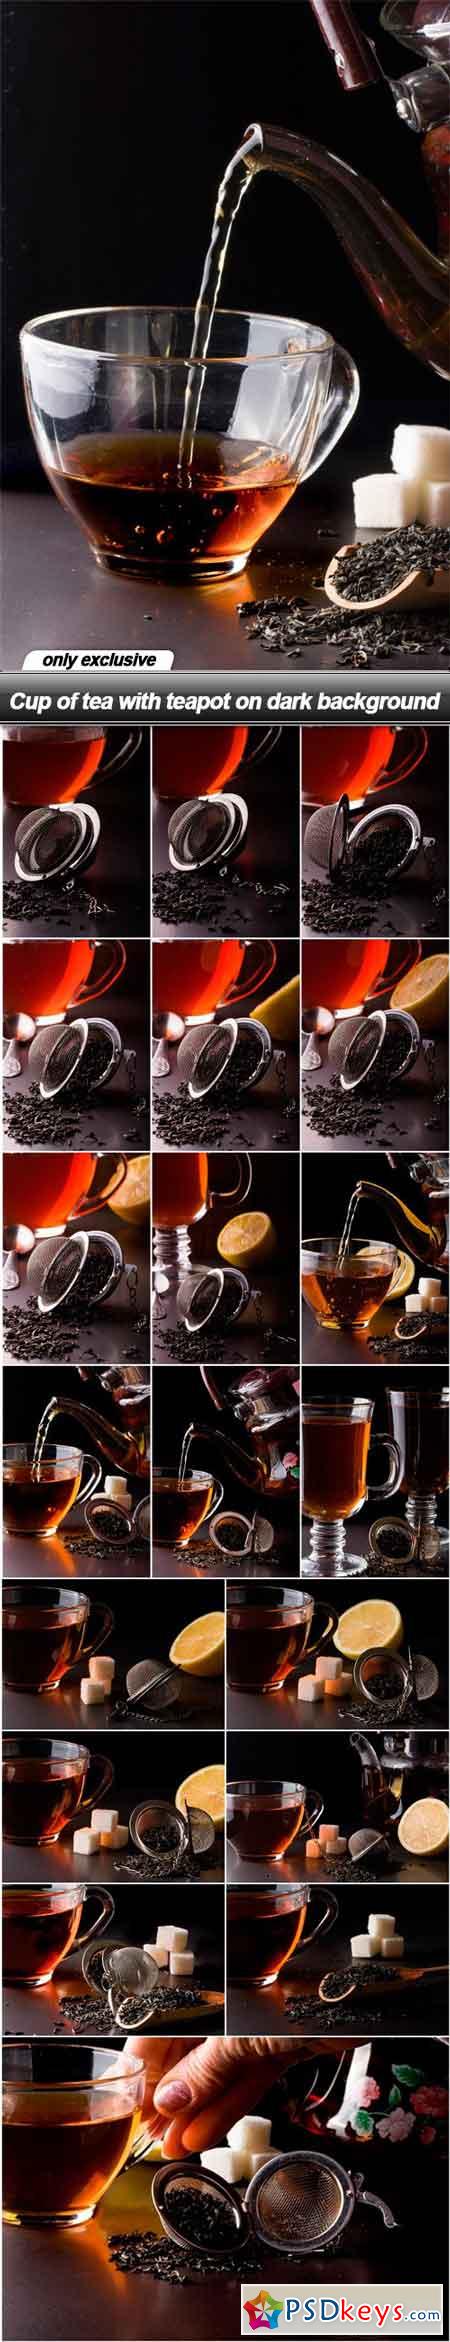 Cup of tea with teapot on dark background - 20 UHQ JPEG